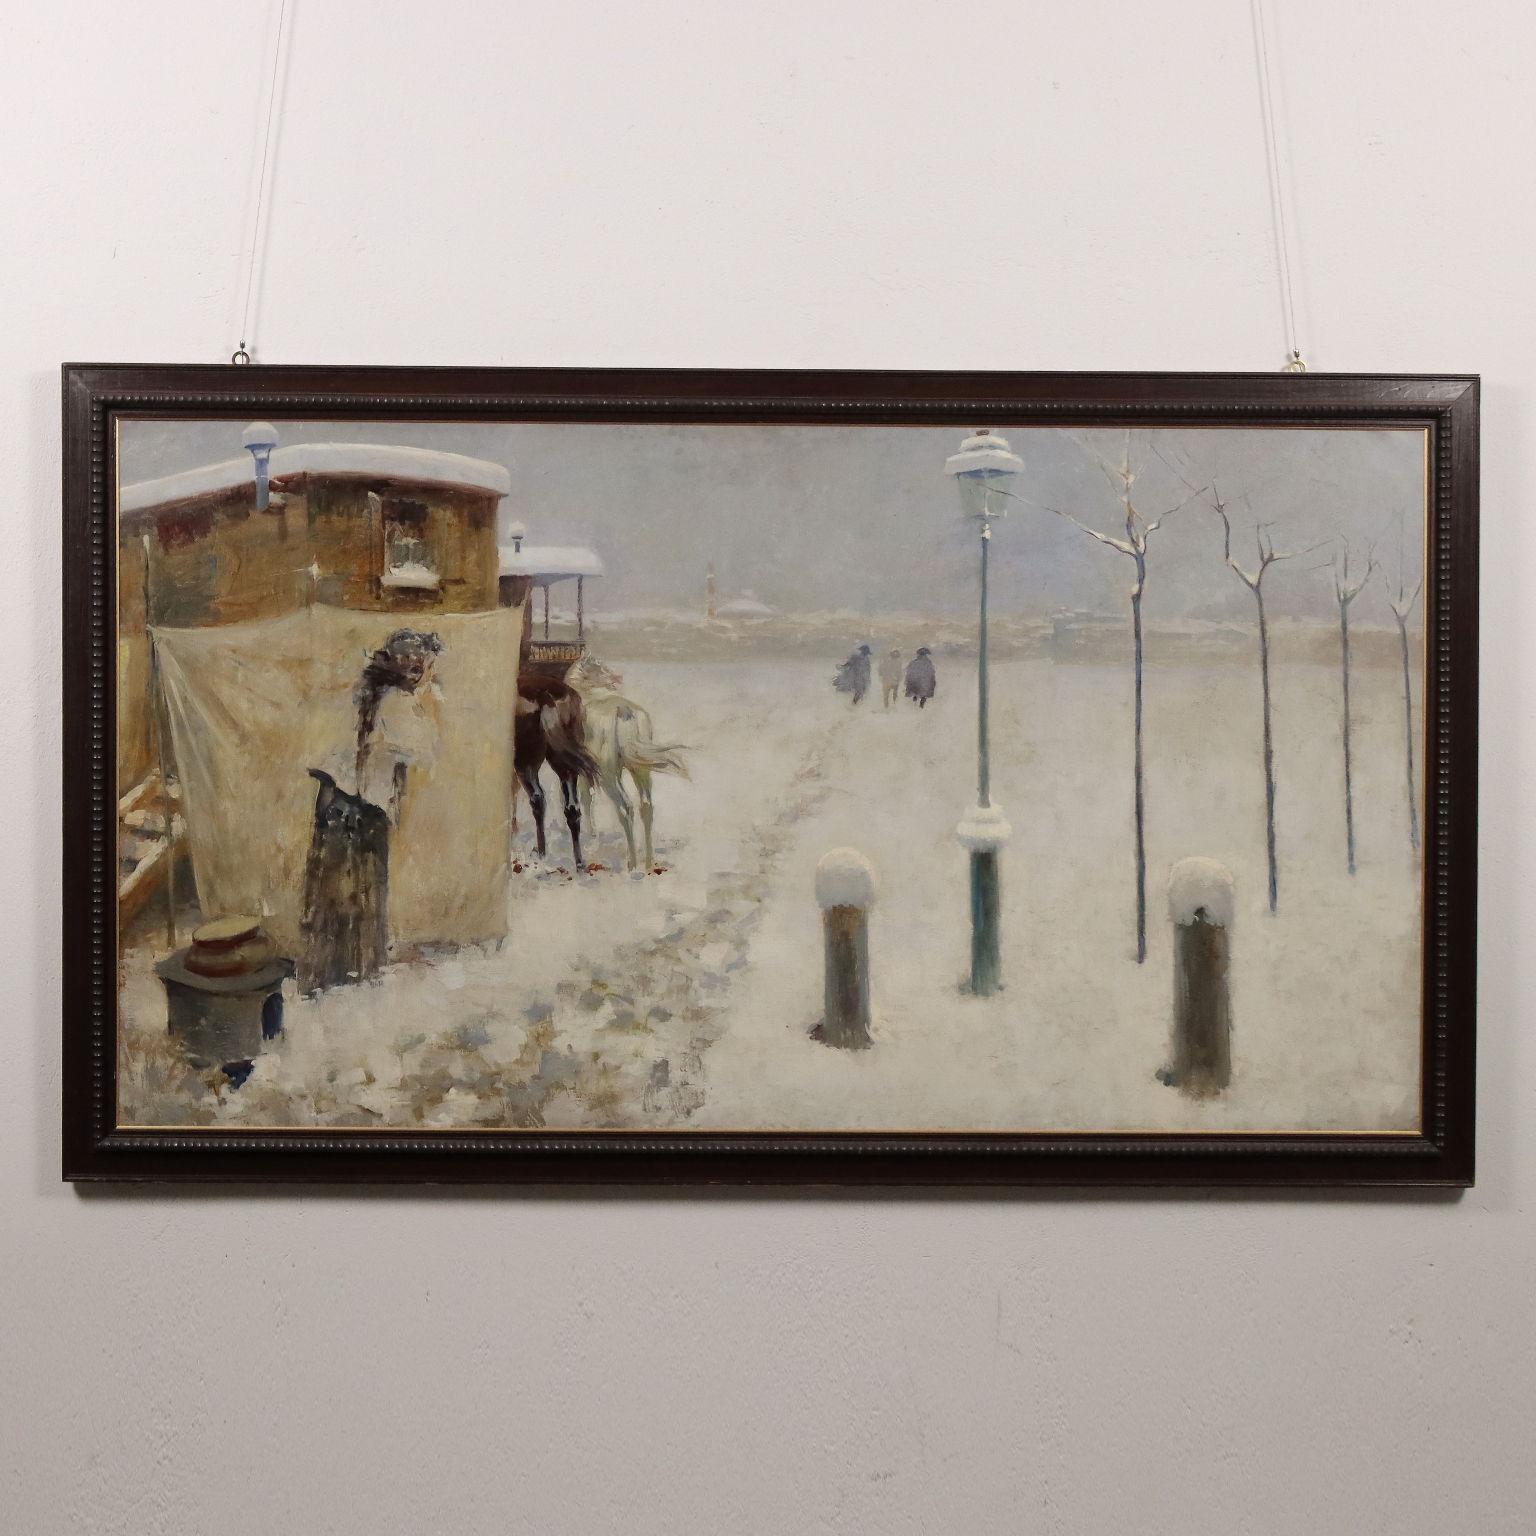 Unknown Landscape Painting - Large Painting with Scene of Arrest in Snowy Landscape, early 1900s